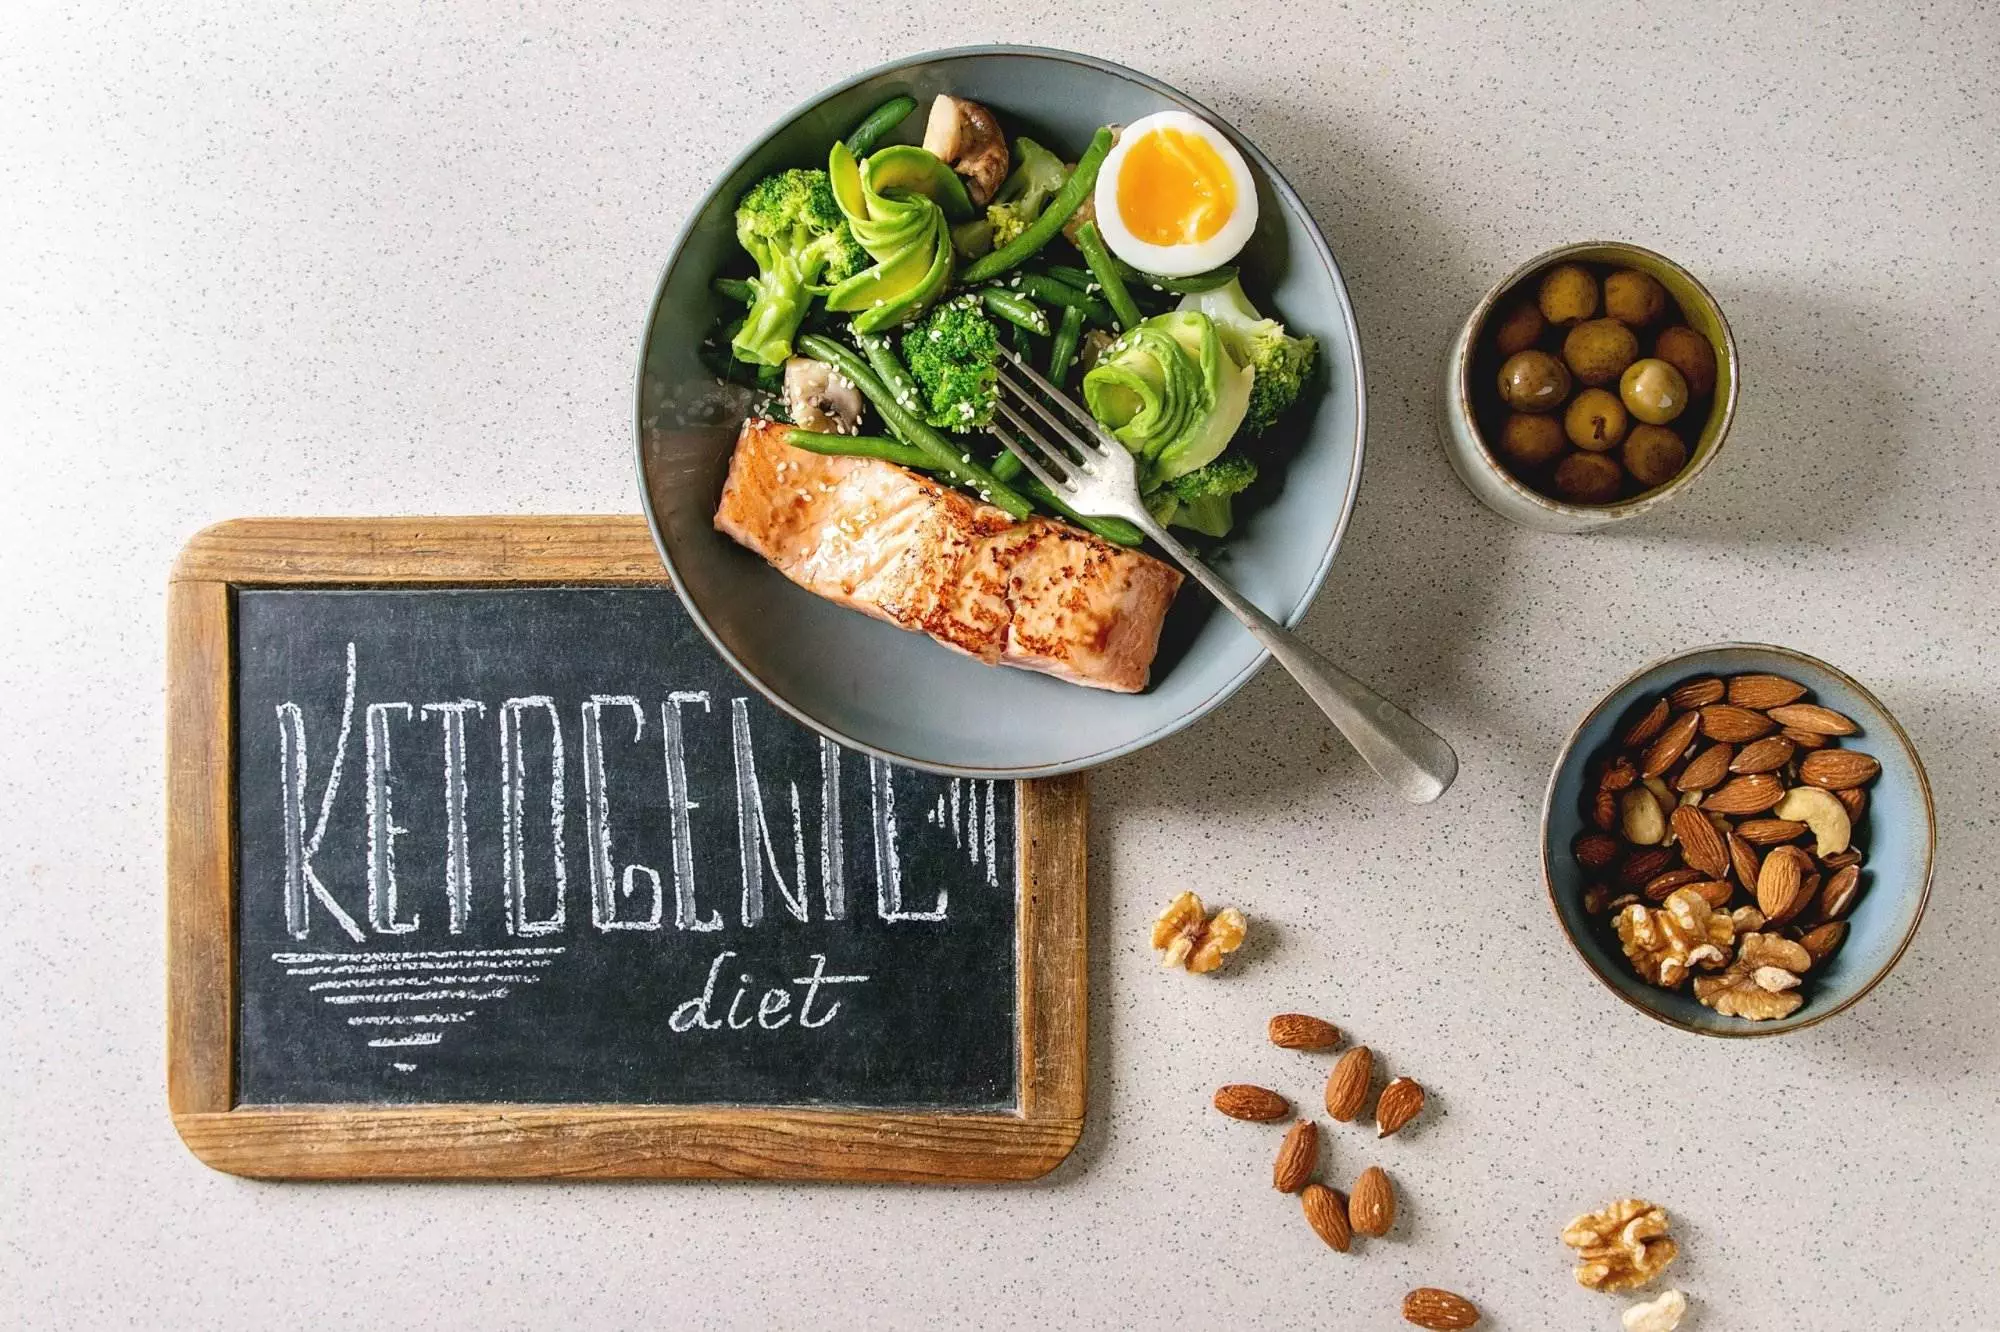 Ketogenic diet meal with salmon, vegetables, eggs, nuts.